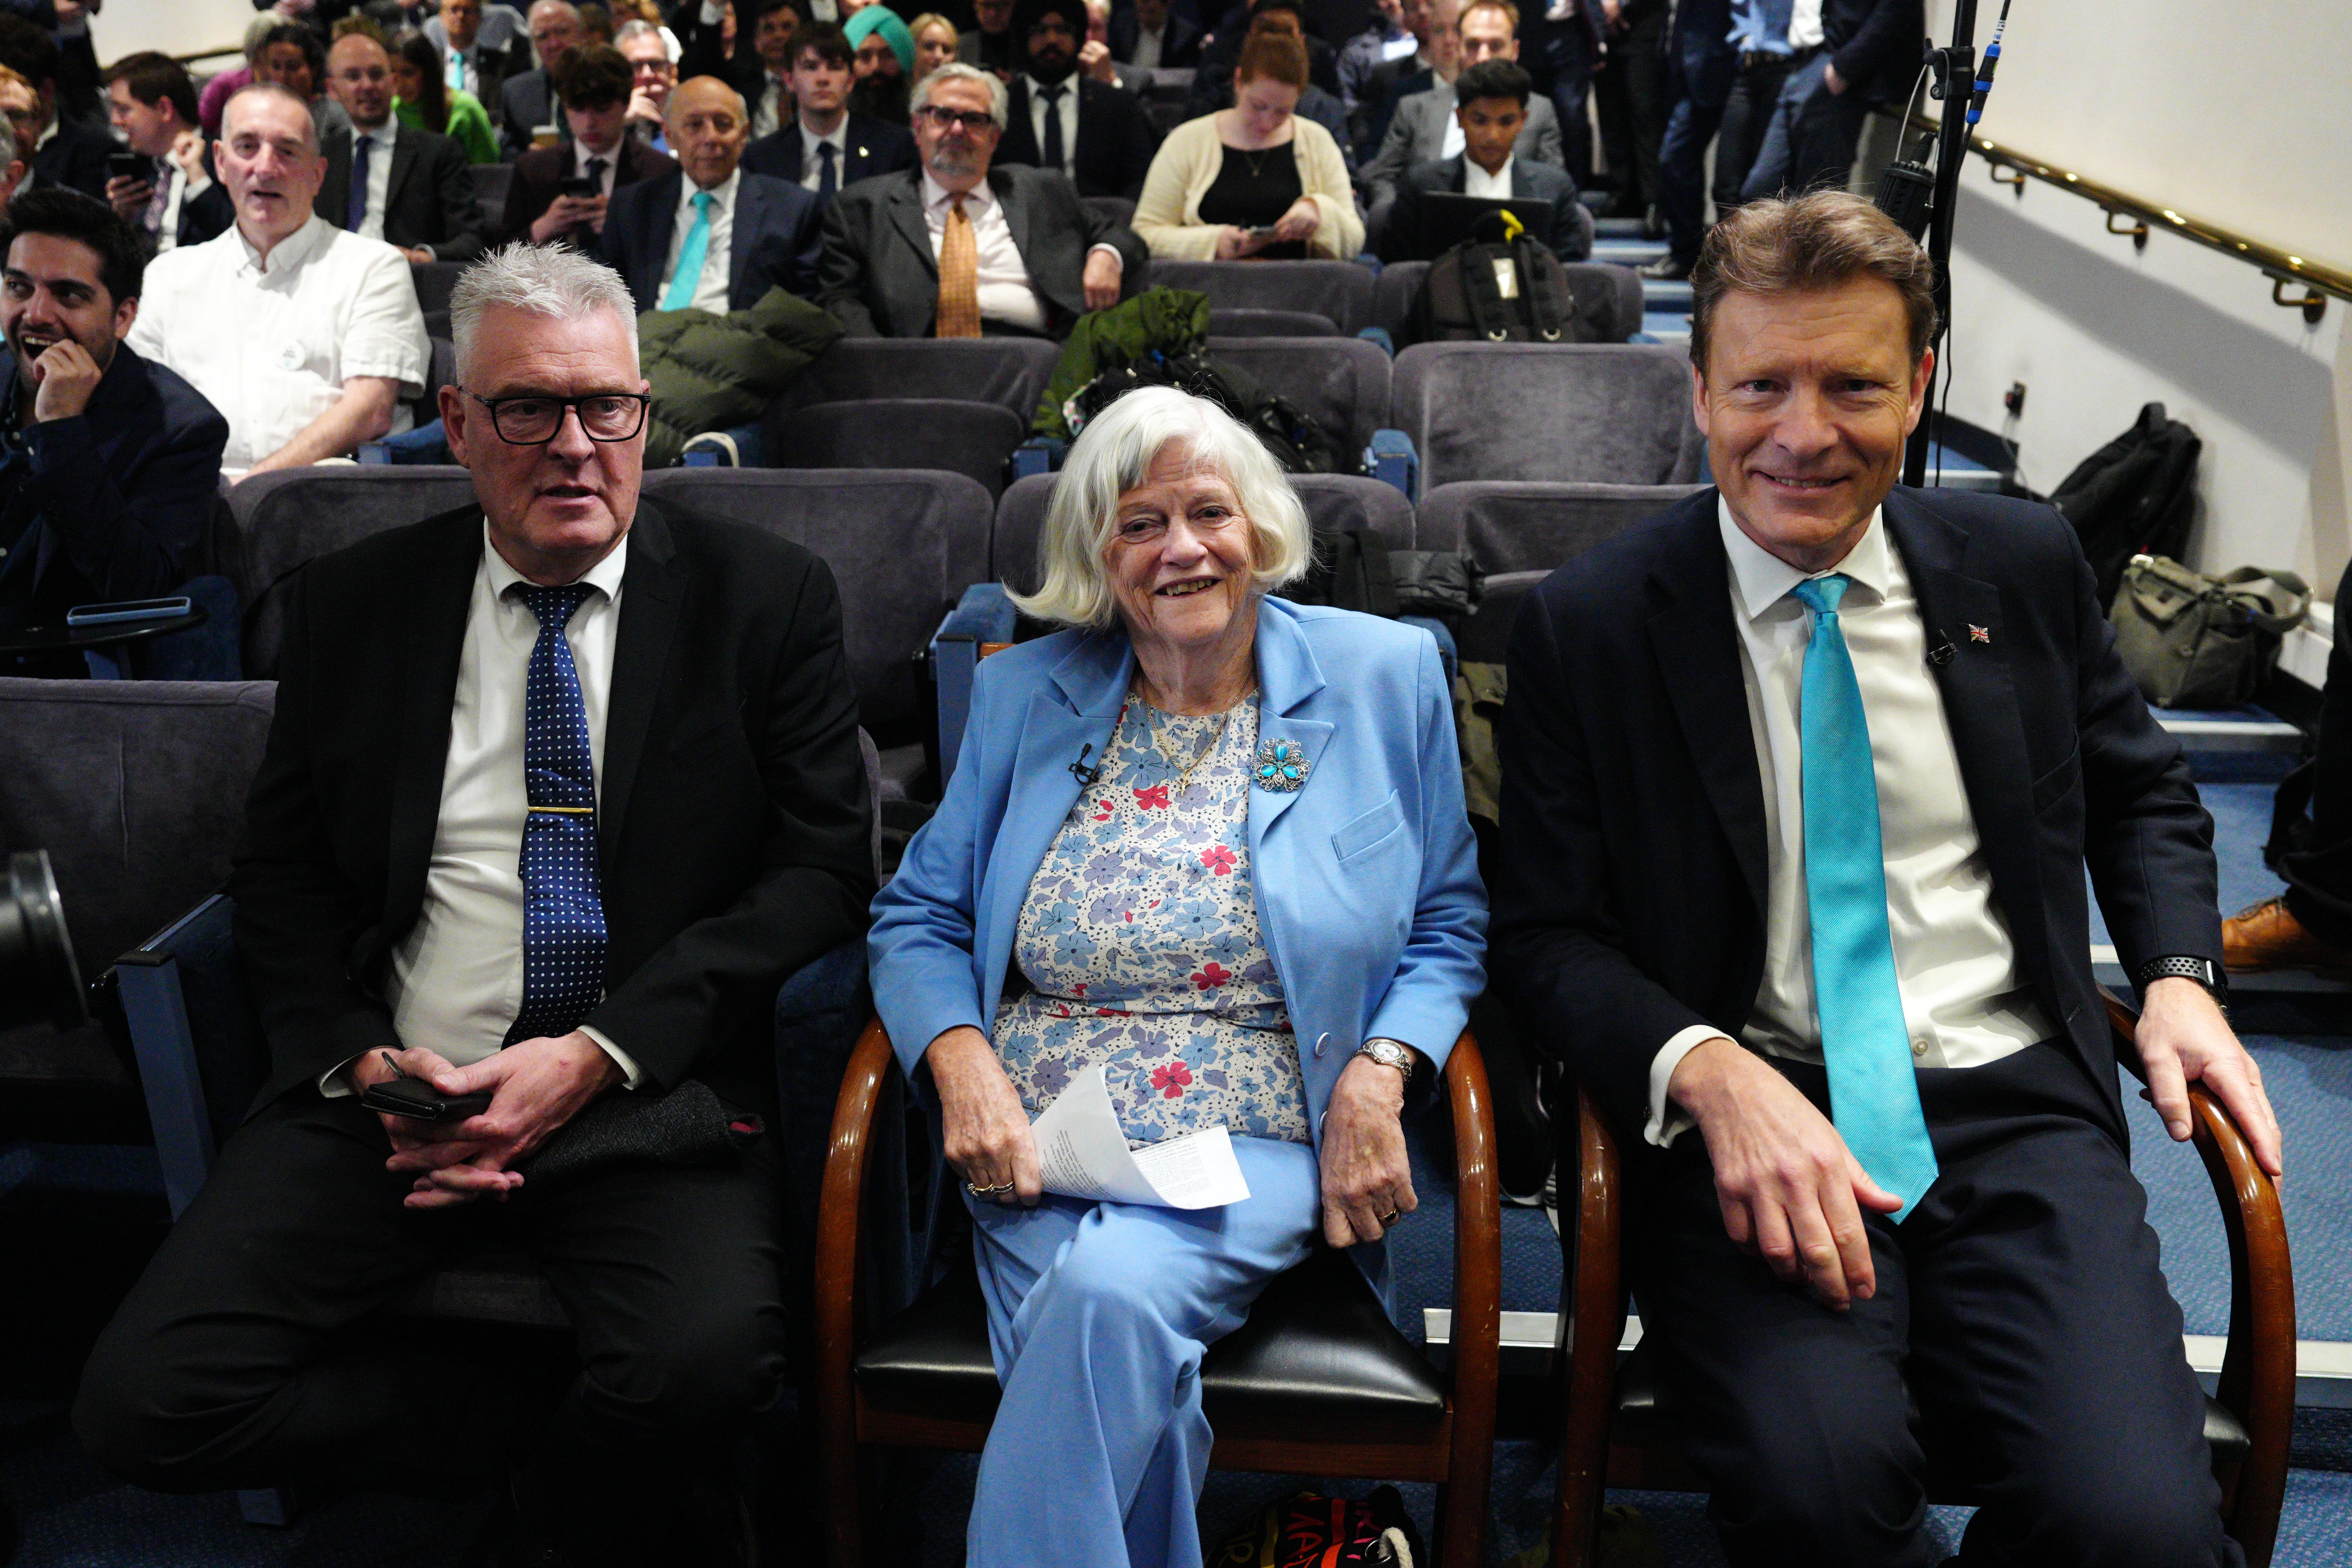 Lee Anderson, Ann Widdecombe, and Reform UK leader Richard Tice at his party’s election launch on Thursday